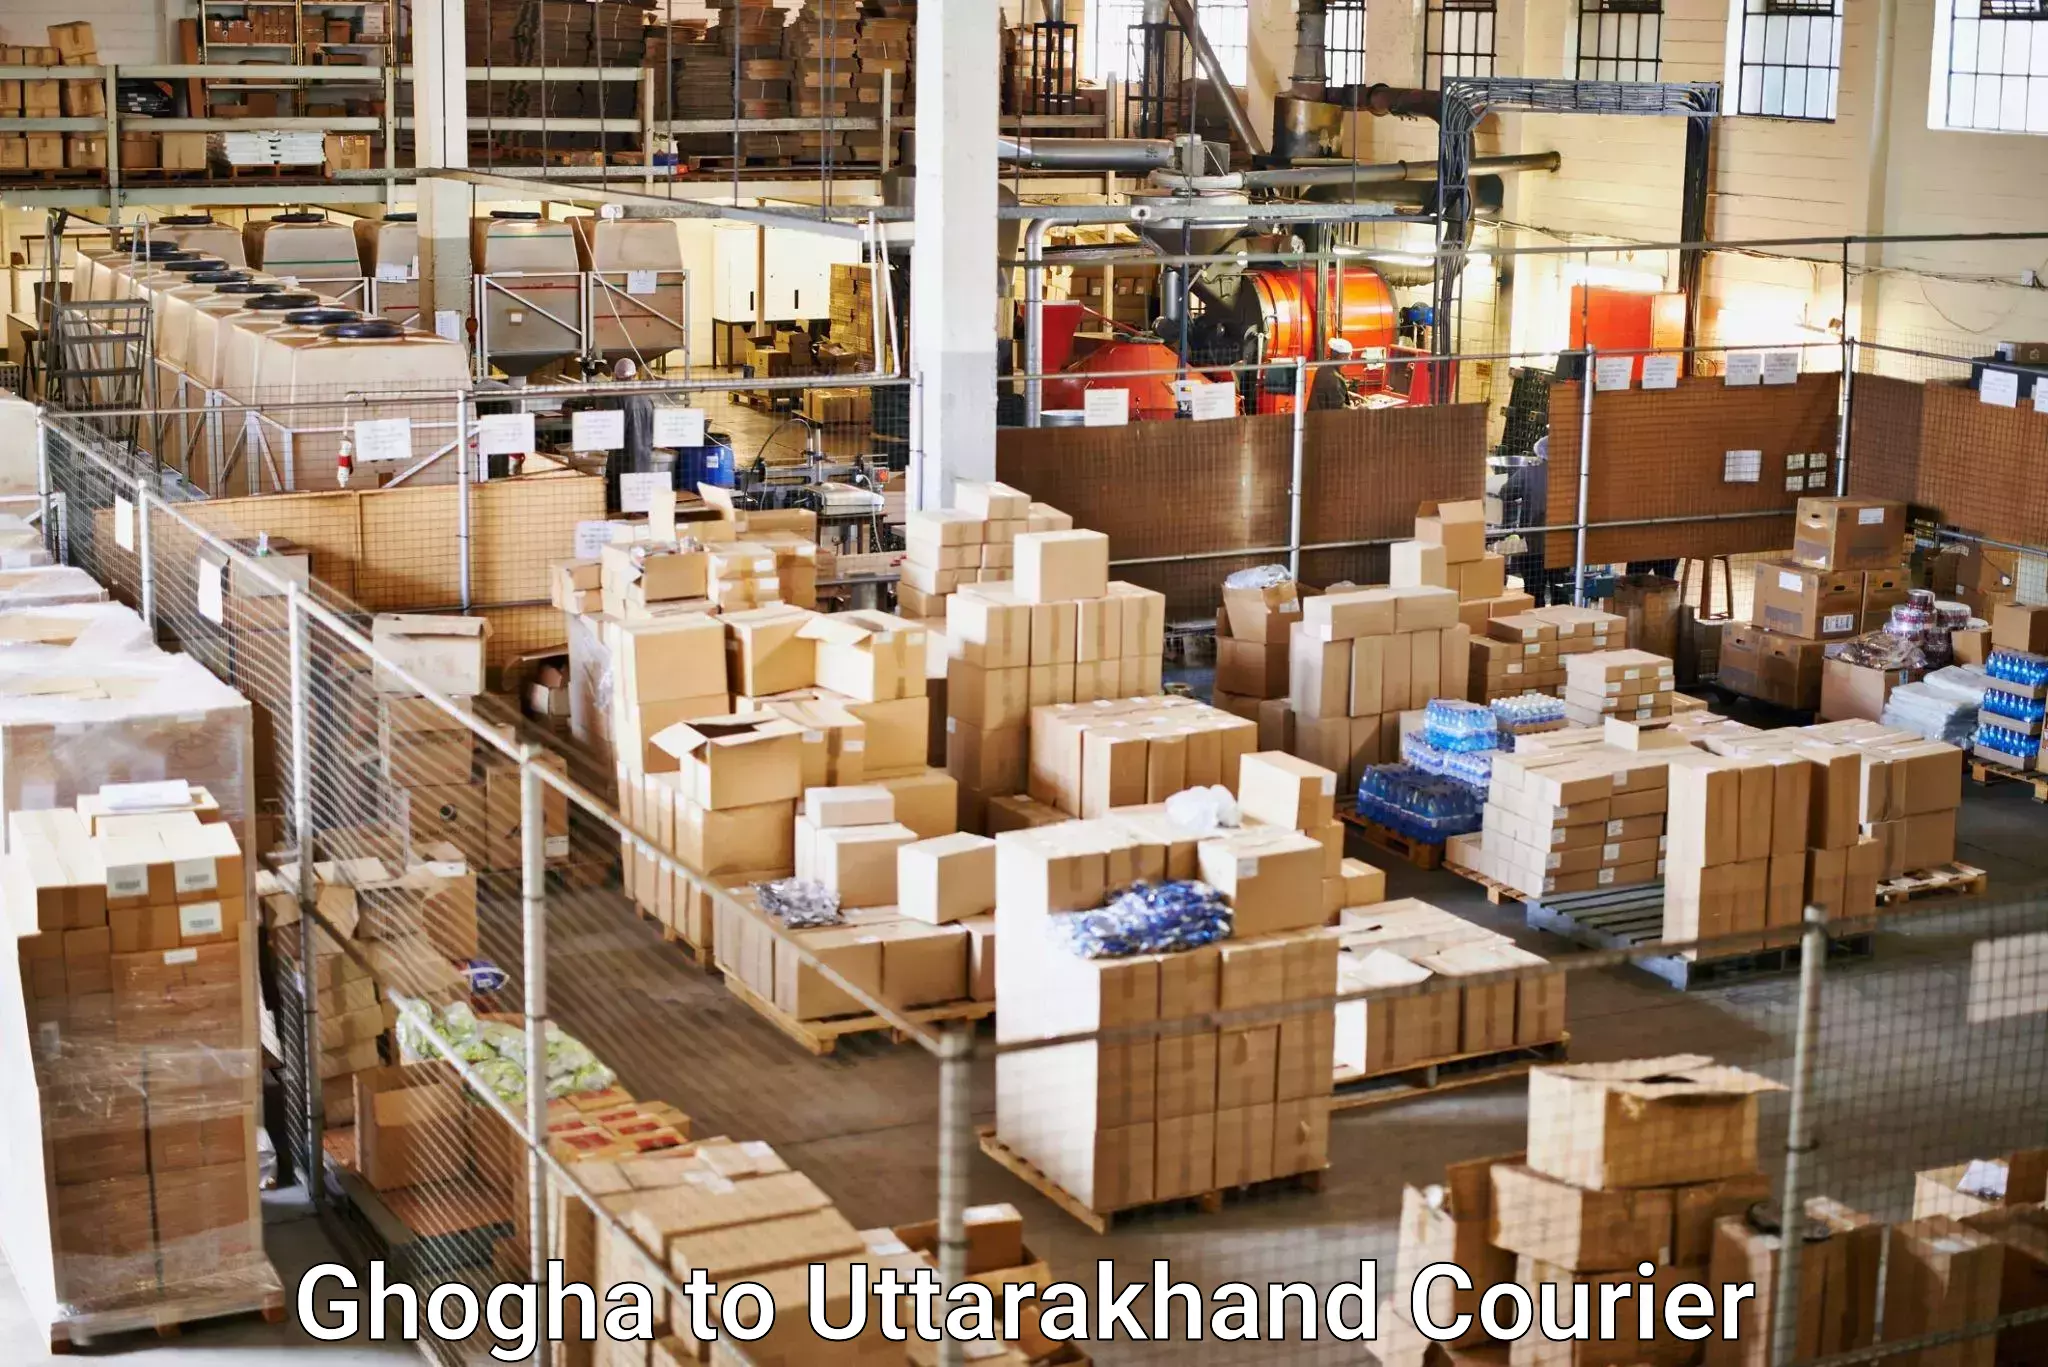 Expedited shipping methods Ghogha to Haridwar